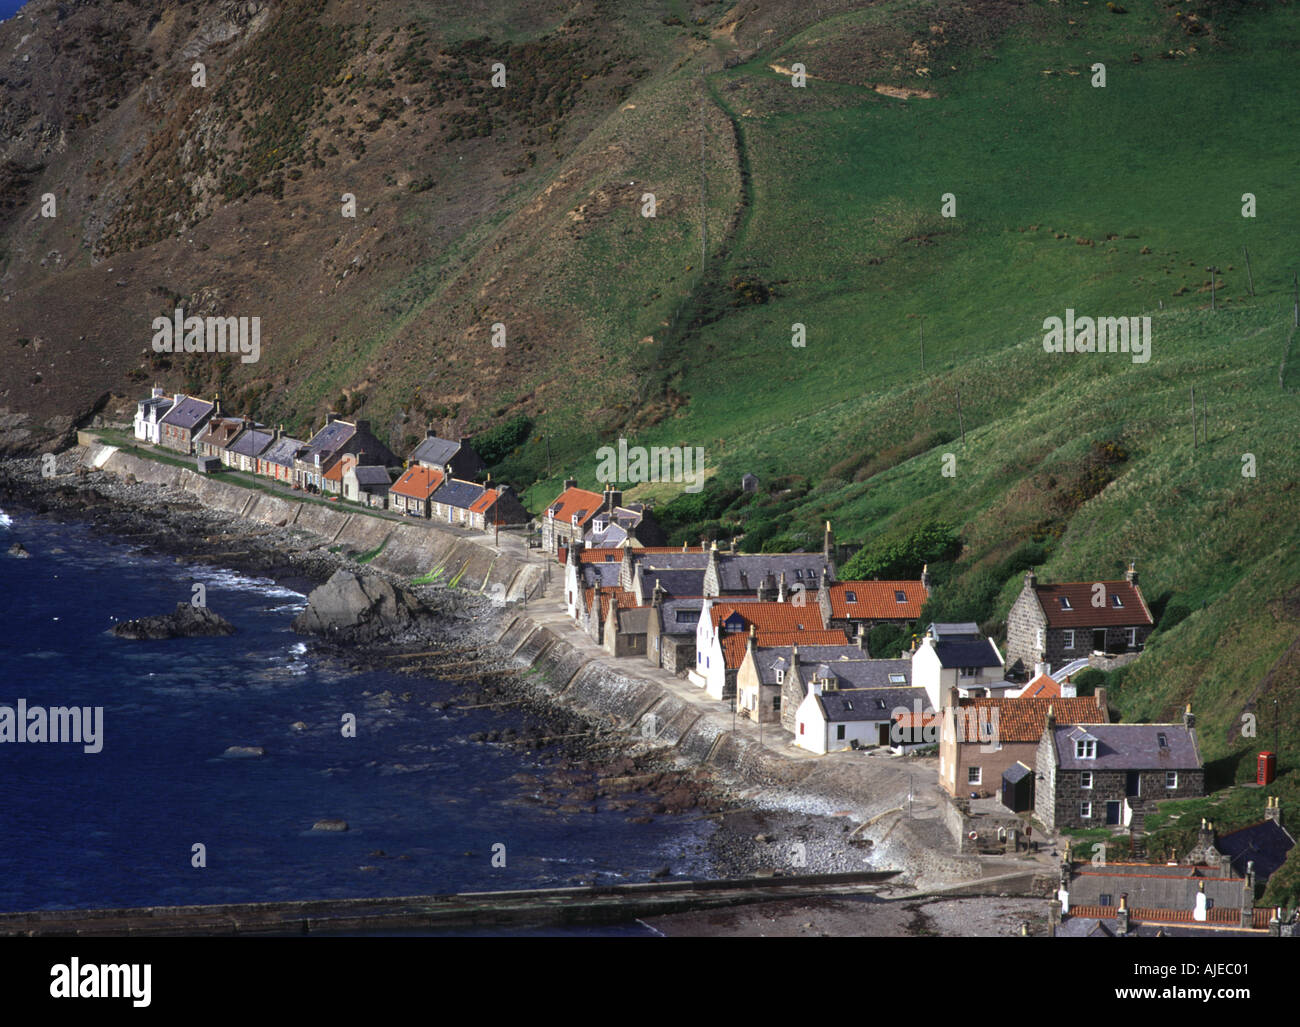 dh Gamrie Bay coast CROVIE VILLAGE BANFFSHIRE SCOTLAND Row of houses by the sea coastal Scottish cottages cliffs homes uk Stock Photo